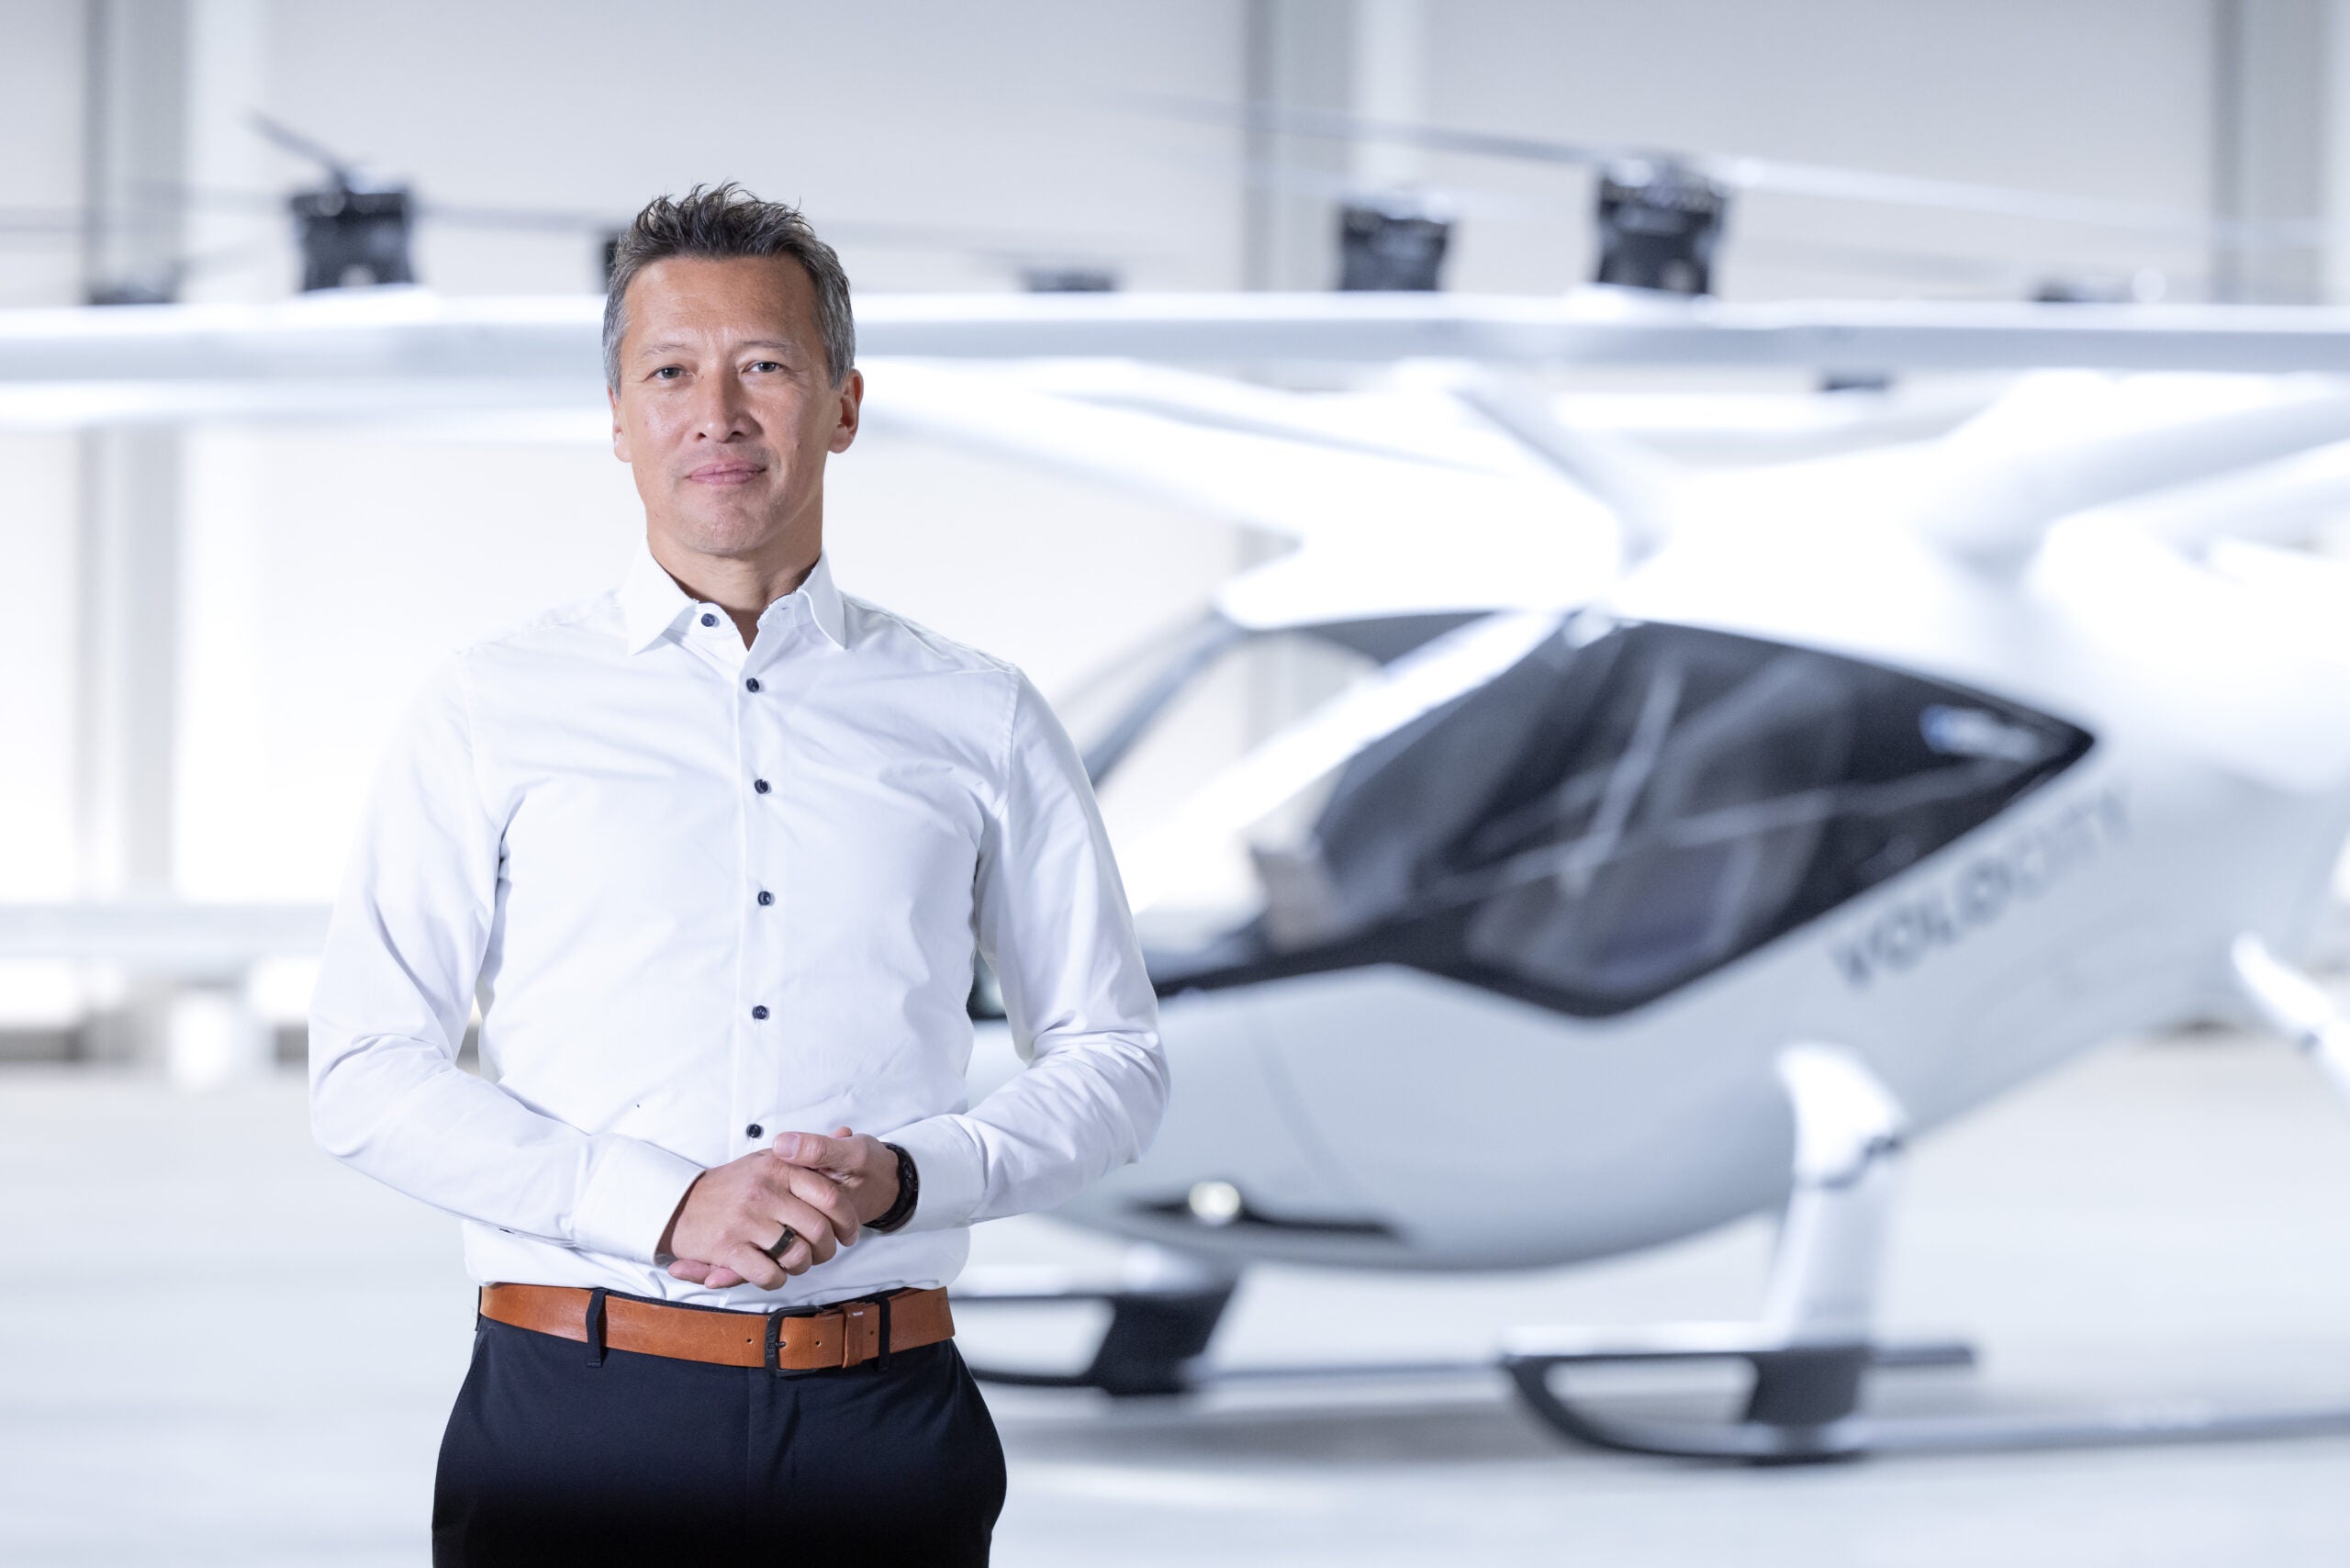 Volocopter Selects Former Airbus Exec Dirk Hoke as New CEO